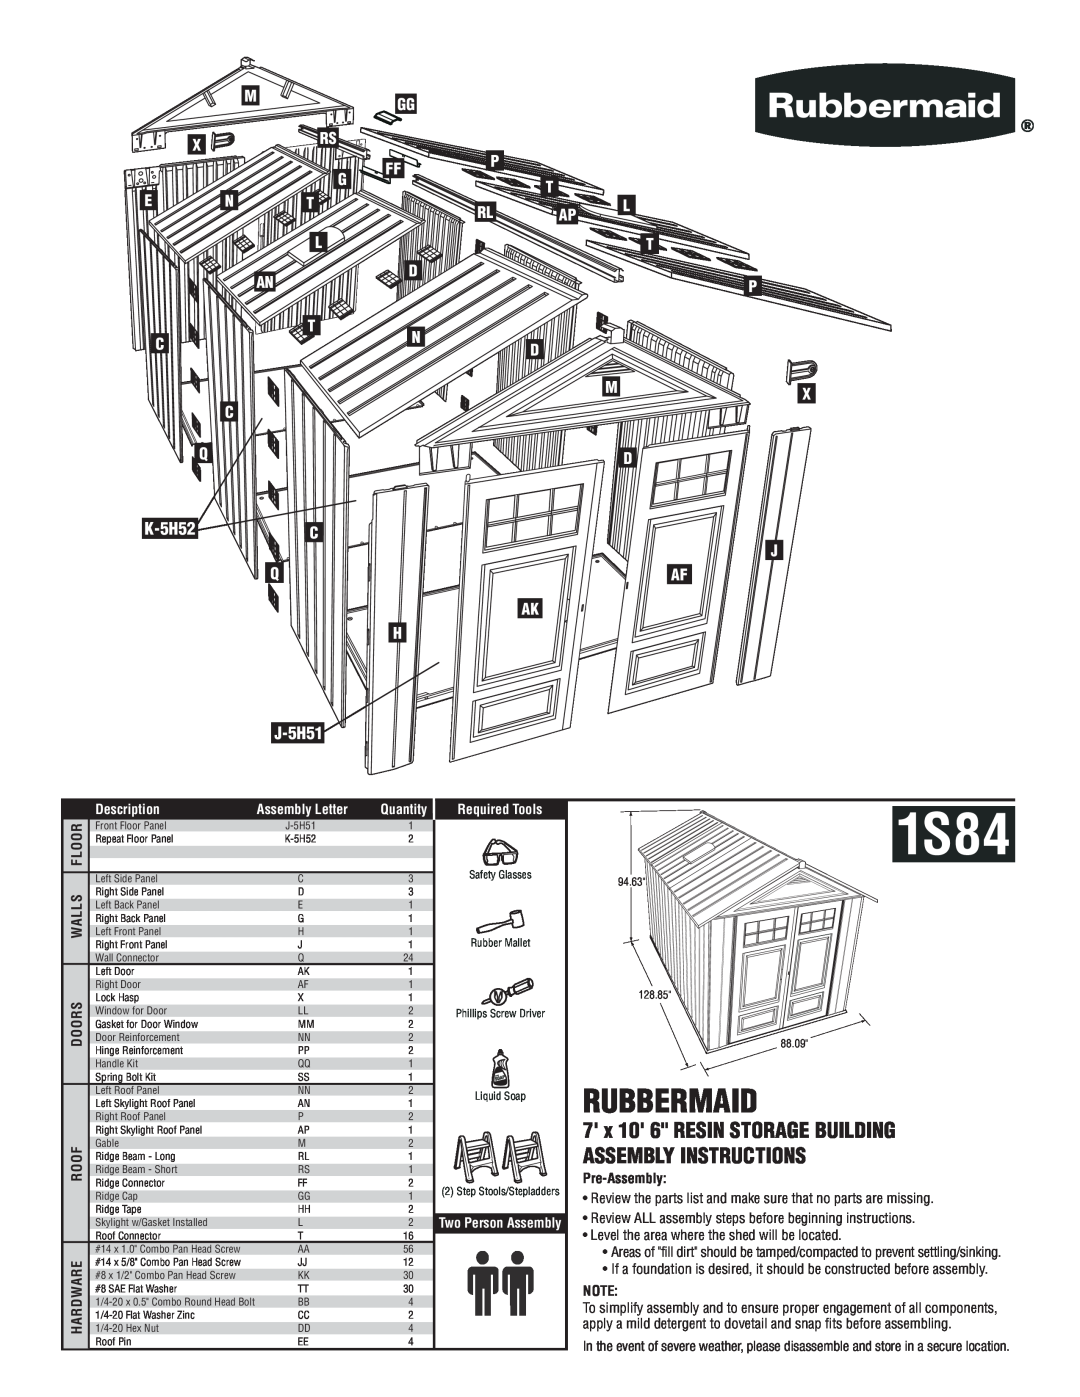 Rubbermaid 1S84 manual K-5H52, 7 x 10 6 RESIN STORAGE BUILDING ASSEMBLY INSTRUCTIONS, J-5H51, Floor, Walls, Doors, Roof 